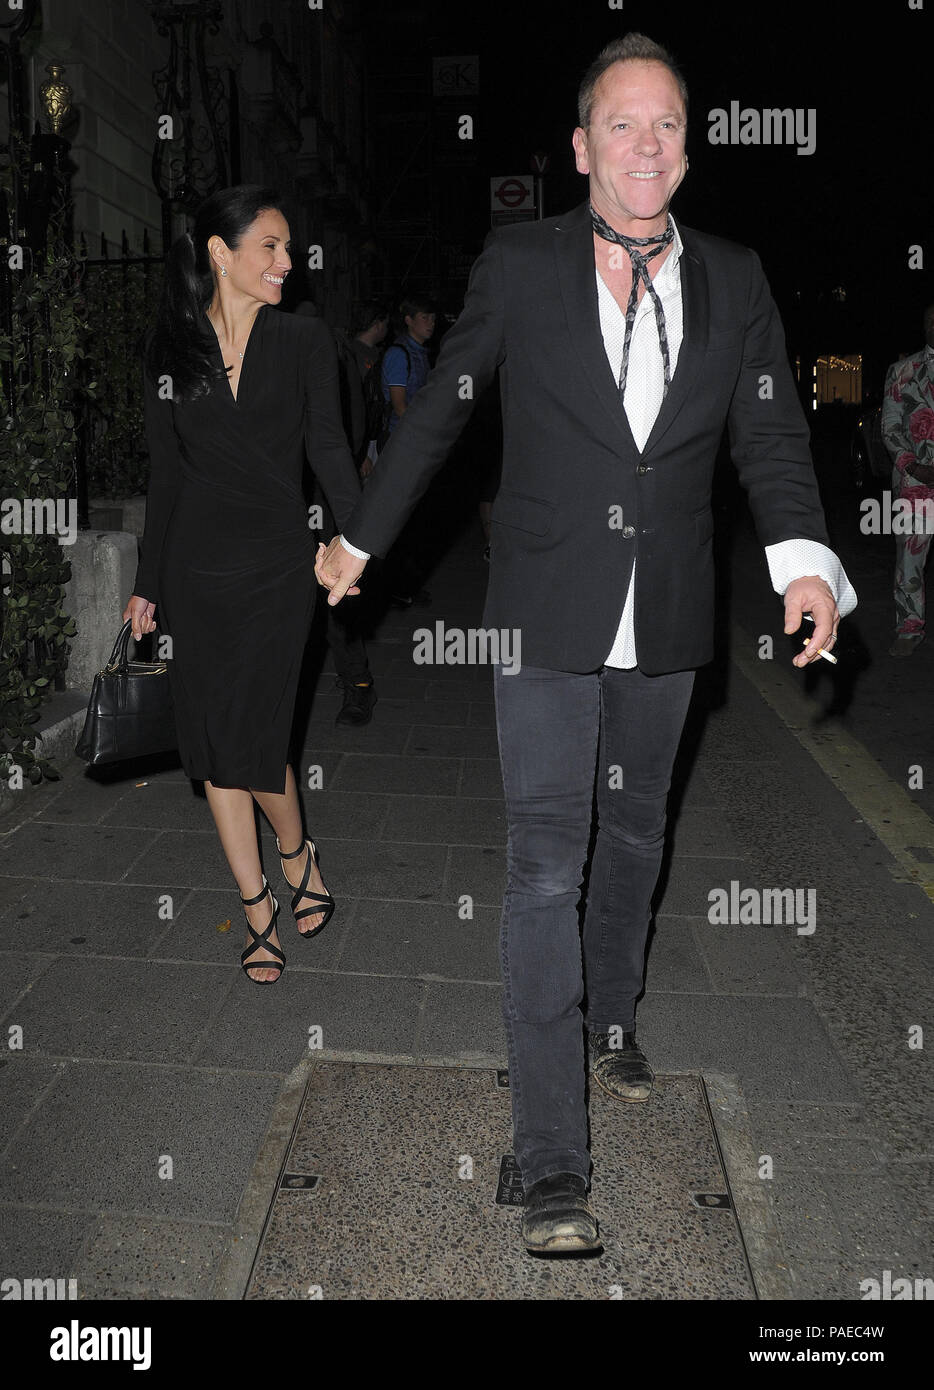 Kiefer Sutherland out and about in Mayfair  Featuring: Kiefer Sutherland, Cindy Vela Where: London, United Kingdom When: 21 Jun 2018 Credit: WENN.com Stock Photo